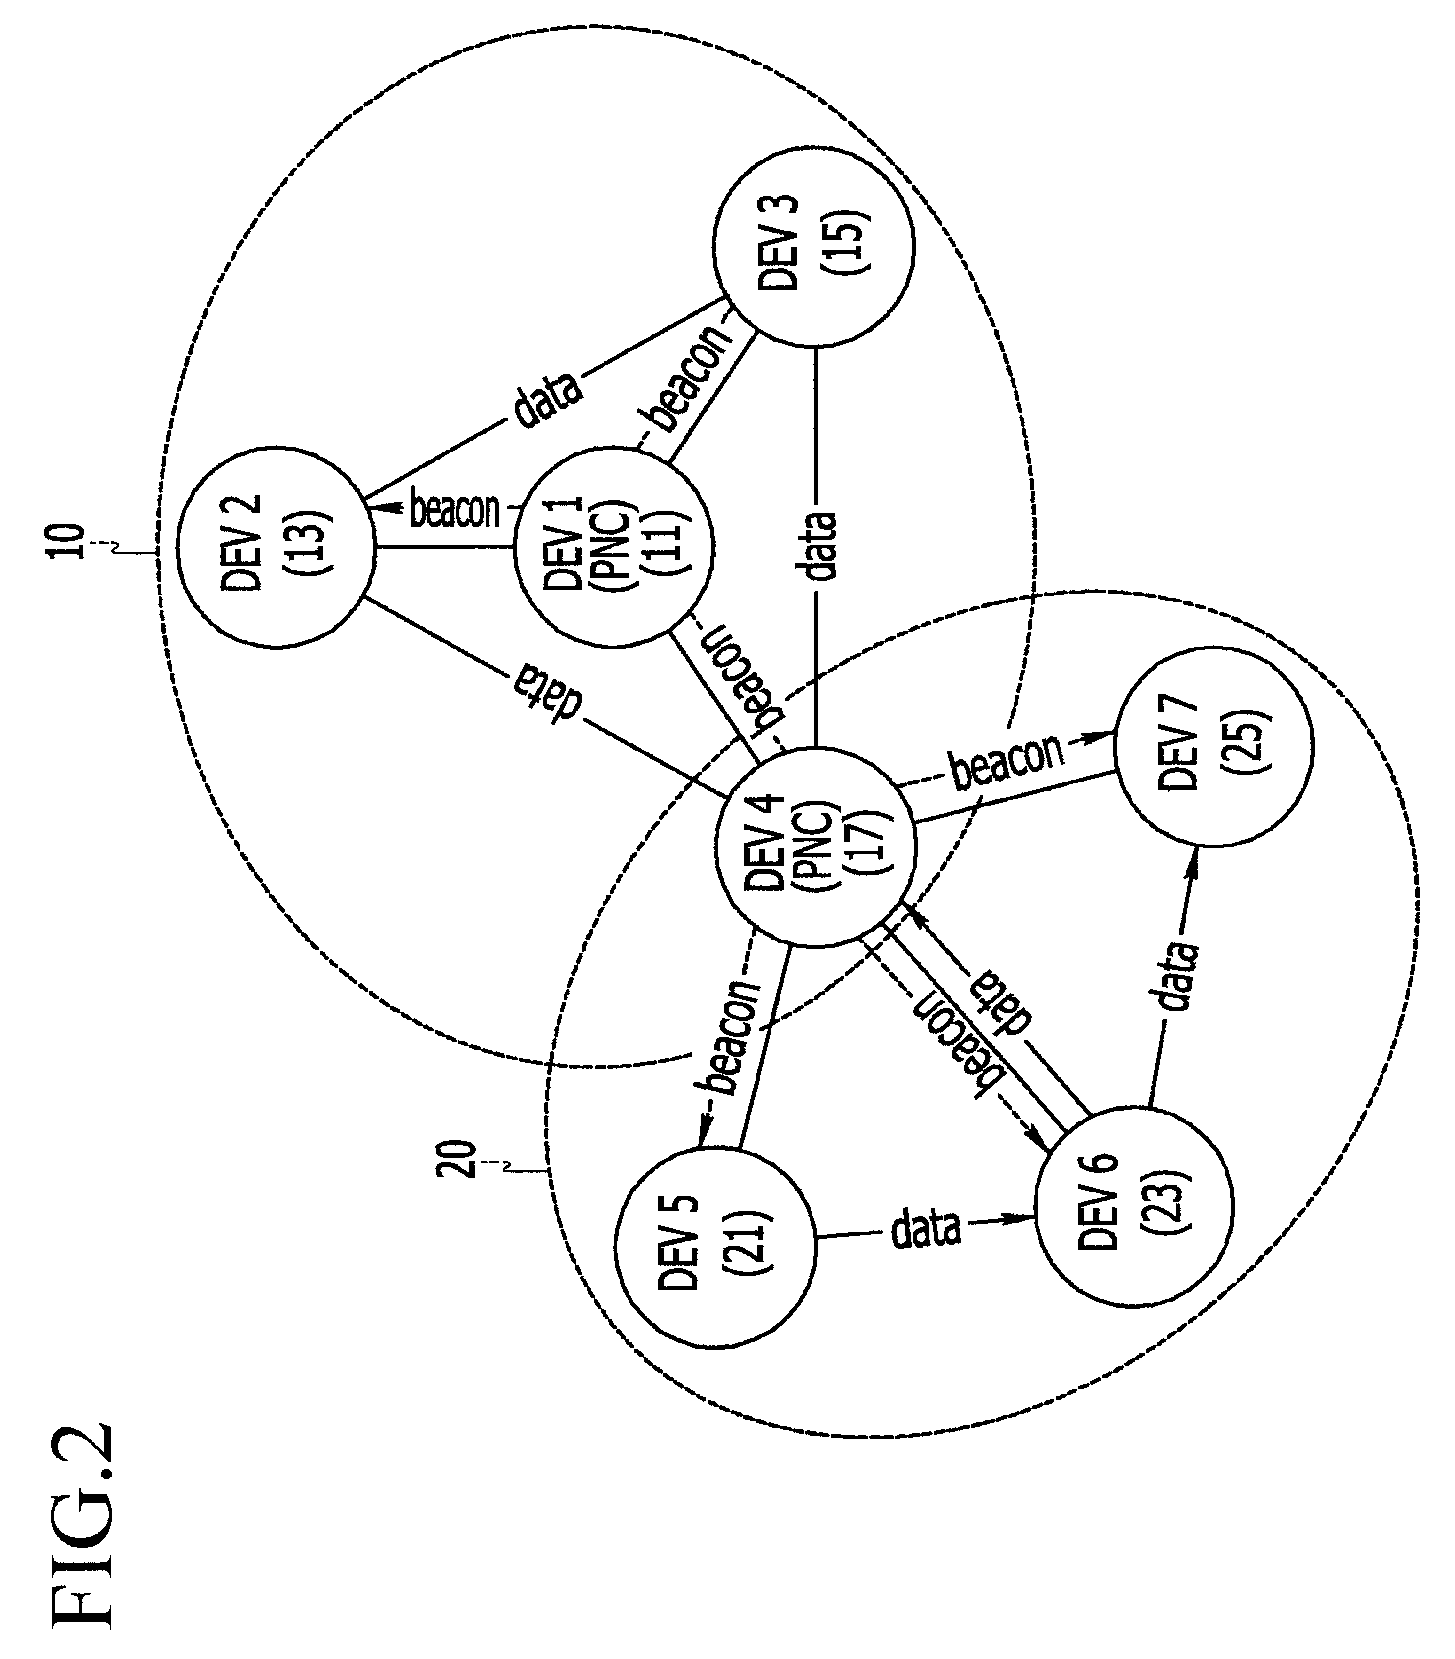 Routing table generation, data transmission and routing route formation method for multi-hop services in high rate wireless personal networks